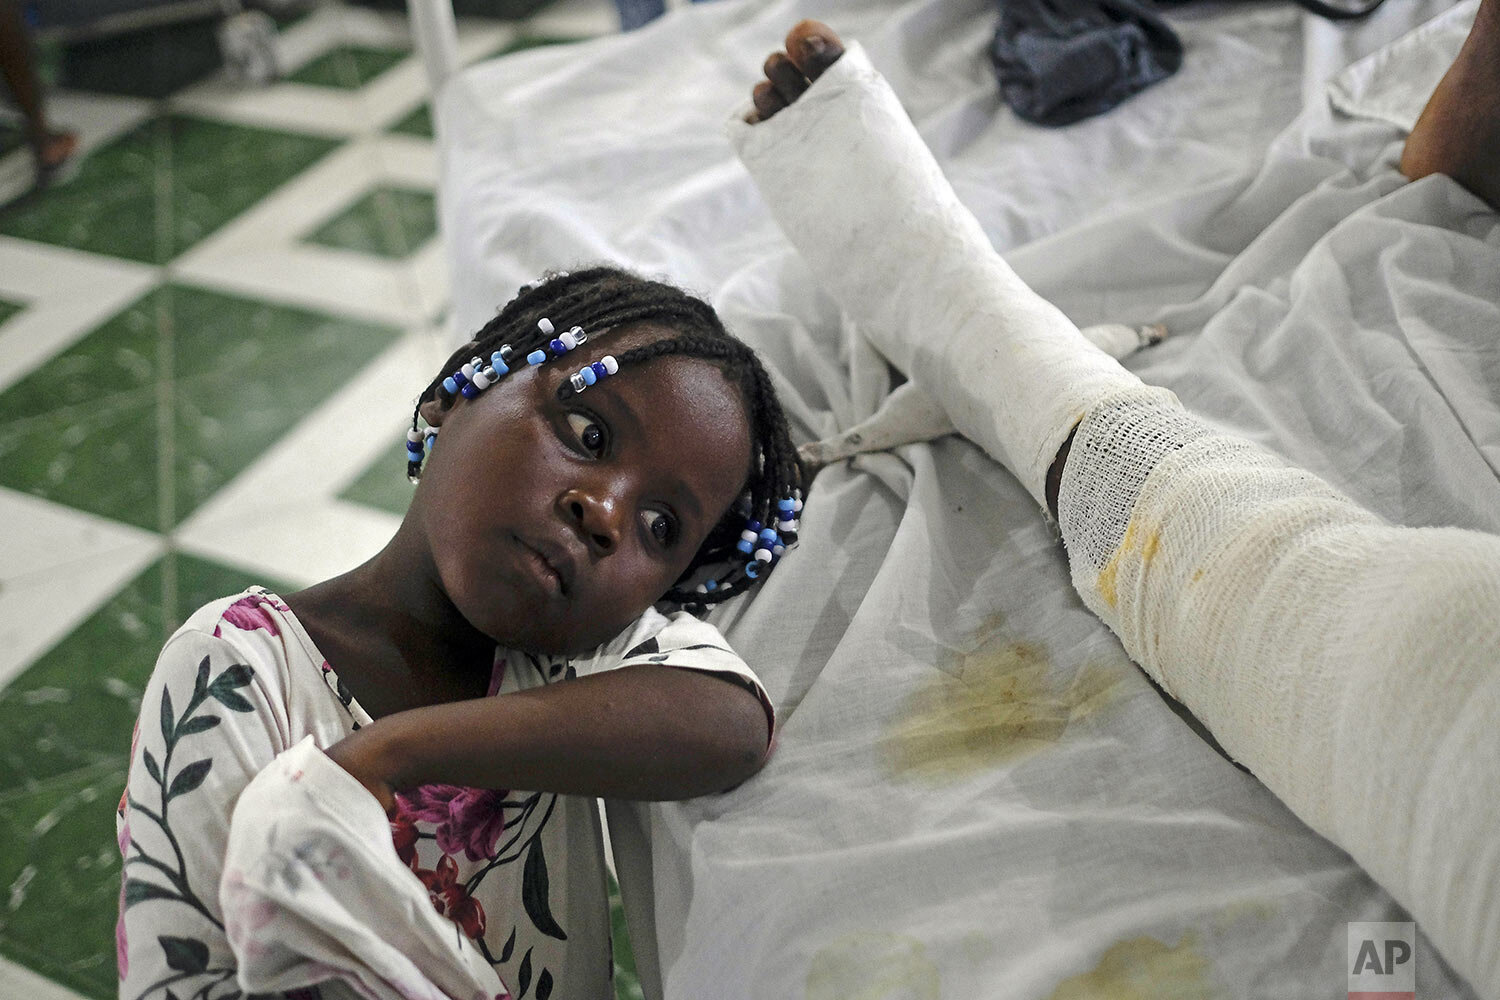  Younaika rests next to her mother Jertha Ylet, who was injured in the 7.2 magnitude earthquake one week prior, at the Immaculate Conception Hospital in Les Cayes, Haiti, Aug. 22, 2021. The quake brought down their house, killing Ylet's father and tw